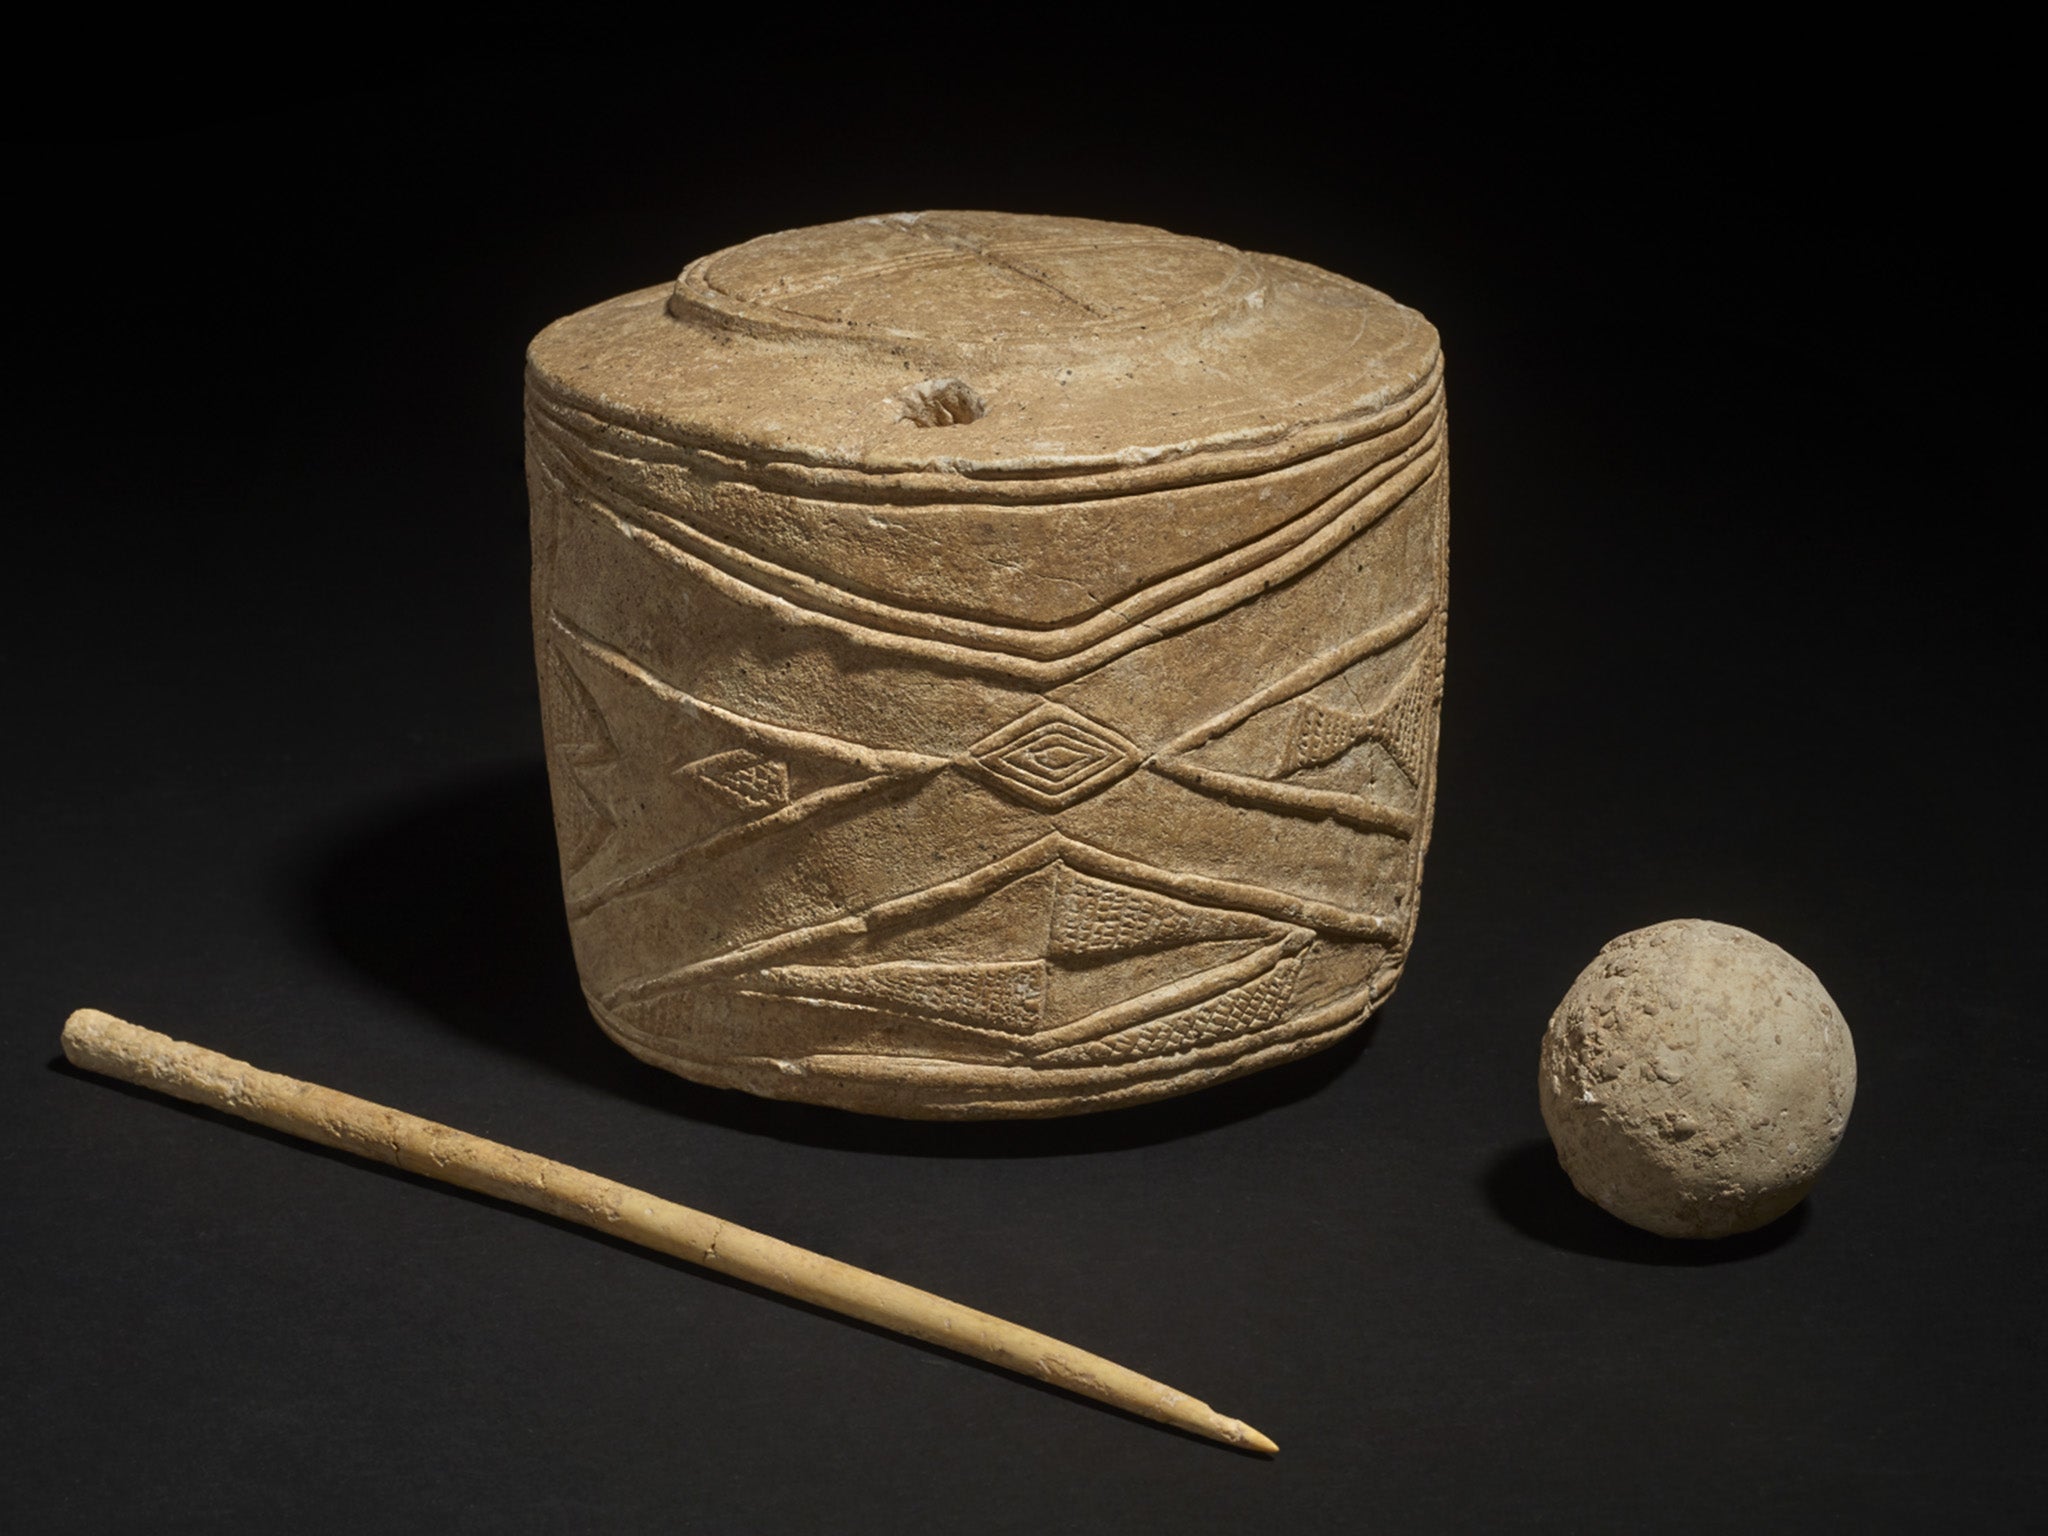 Ancient drum reveals more about how culture passed around Britain and Ireland 5,000 years ago